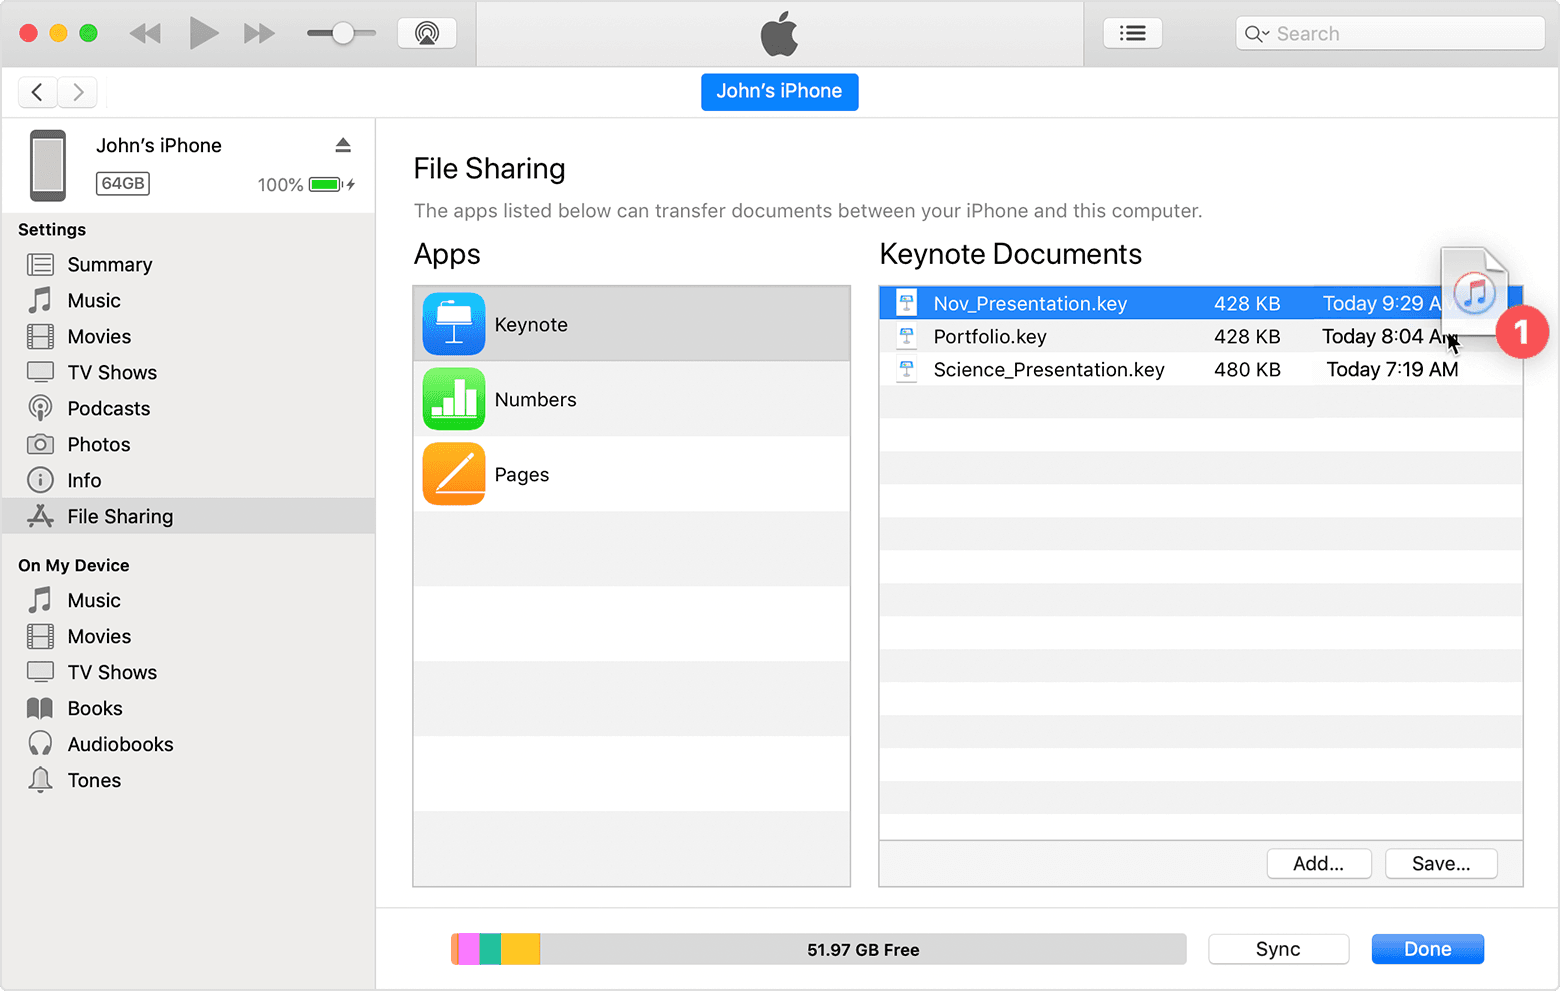 macos-mojave-itunes-iphone12-pro-file-sharing-apps-document-save.png